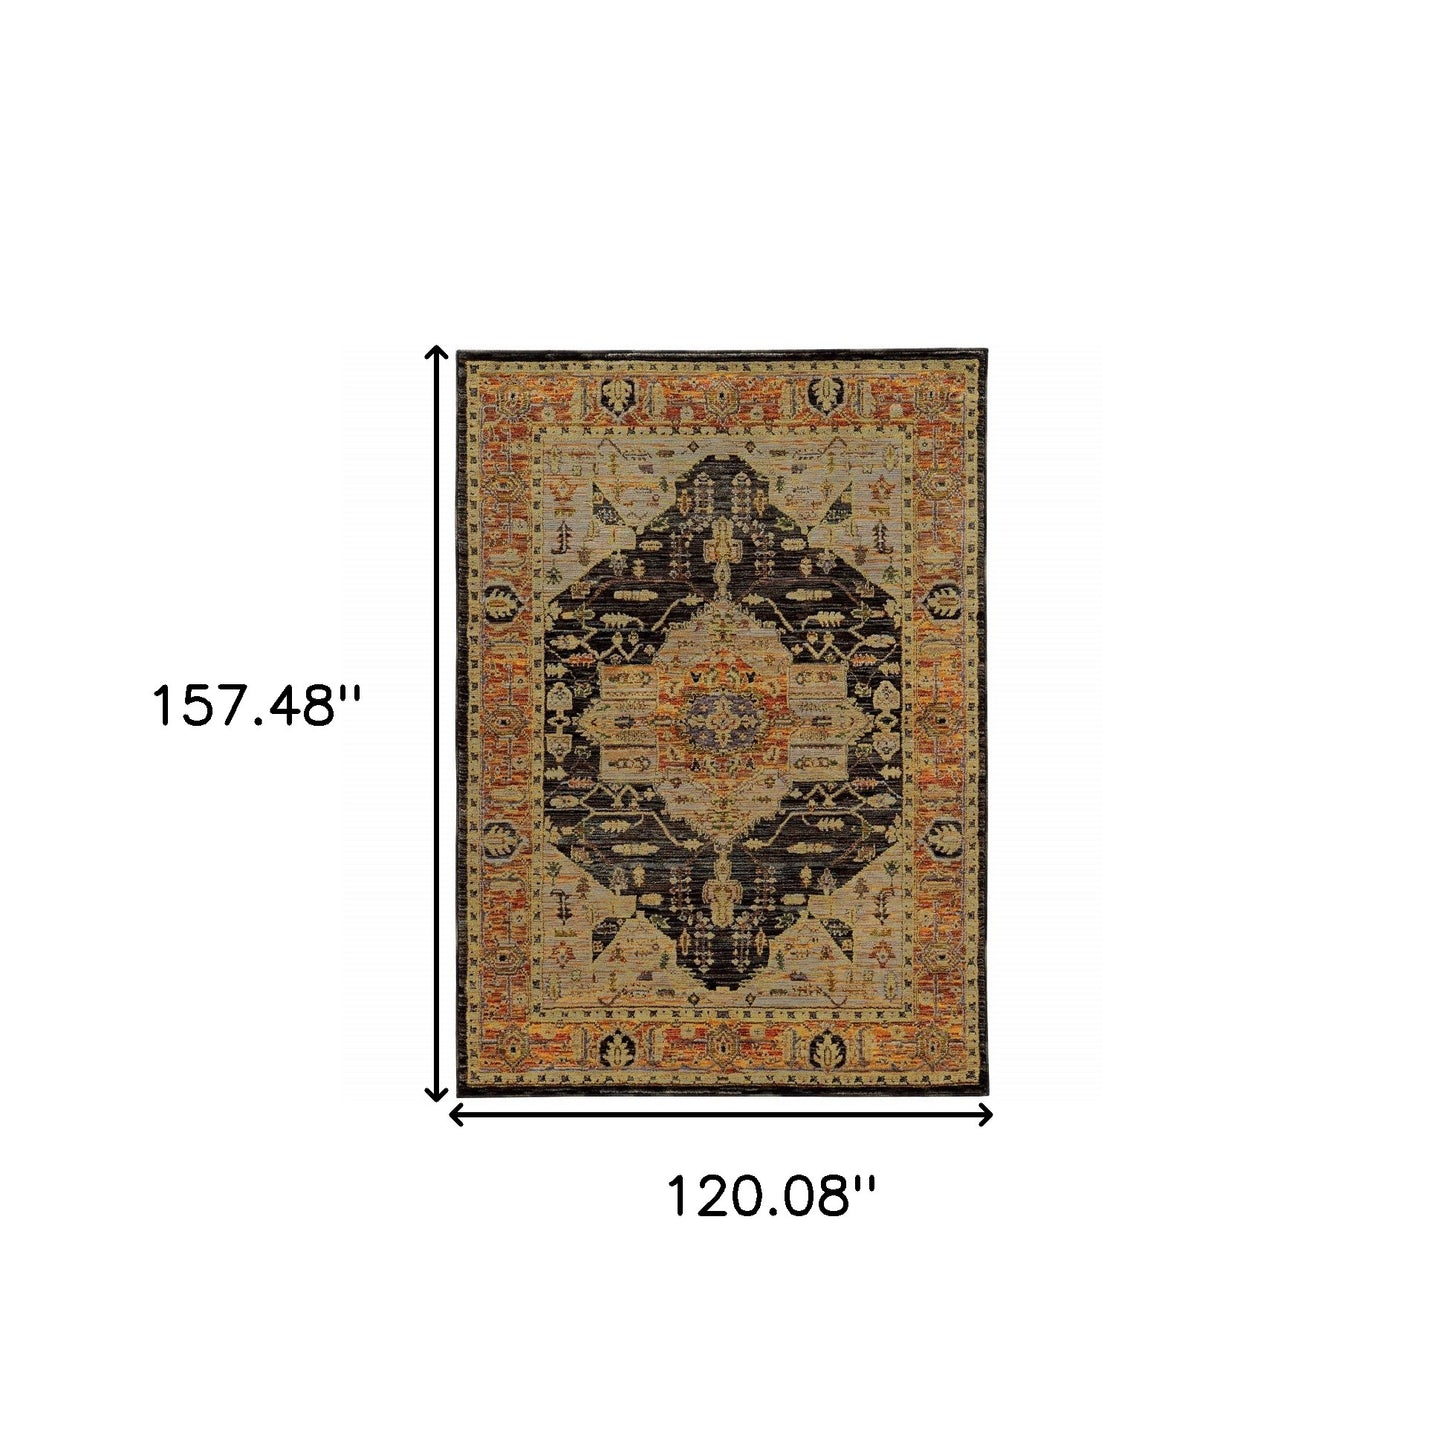 10' x 13' Black and Gold Oriental Power Loom Area Rug